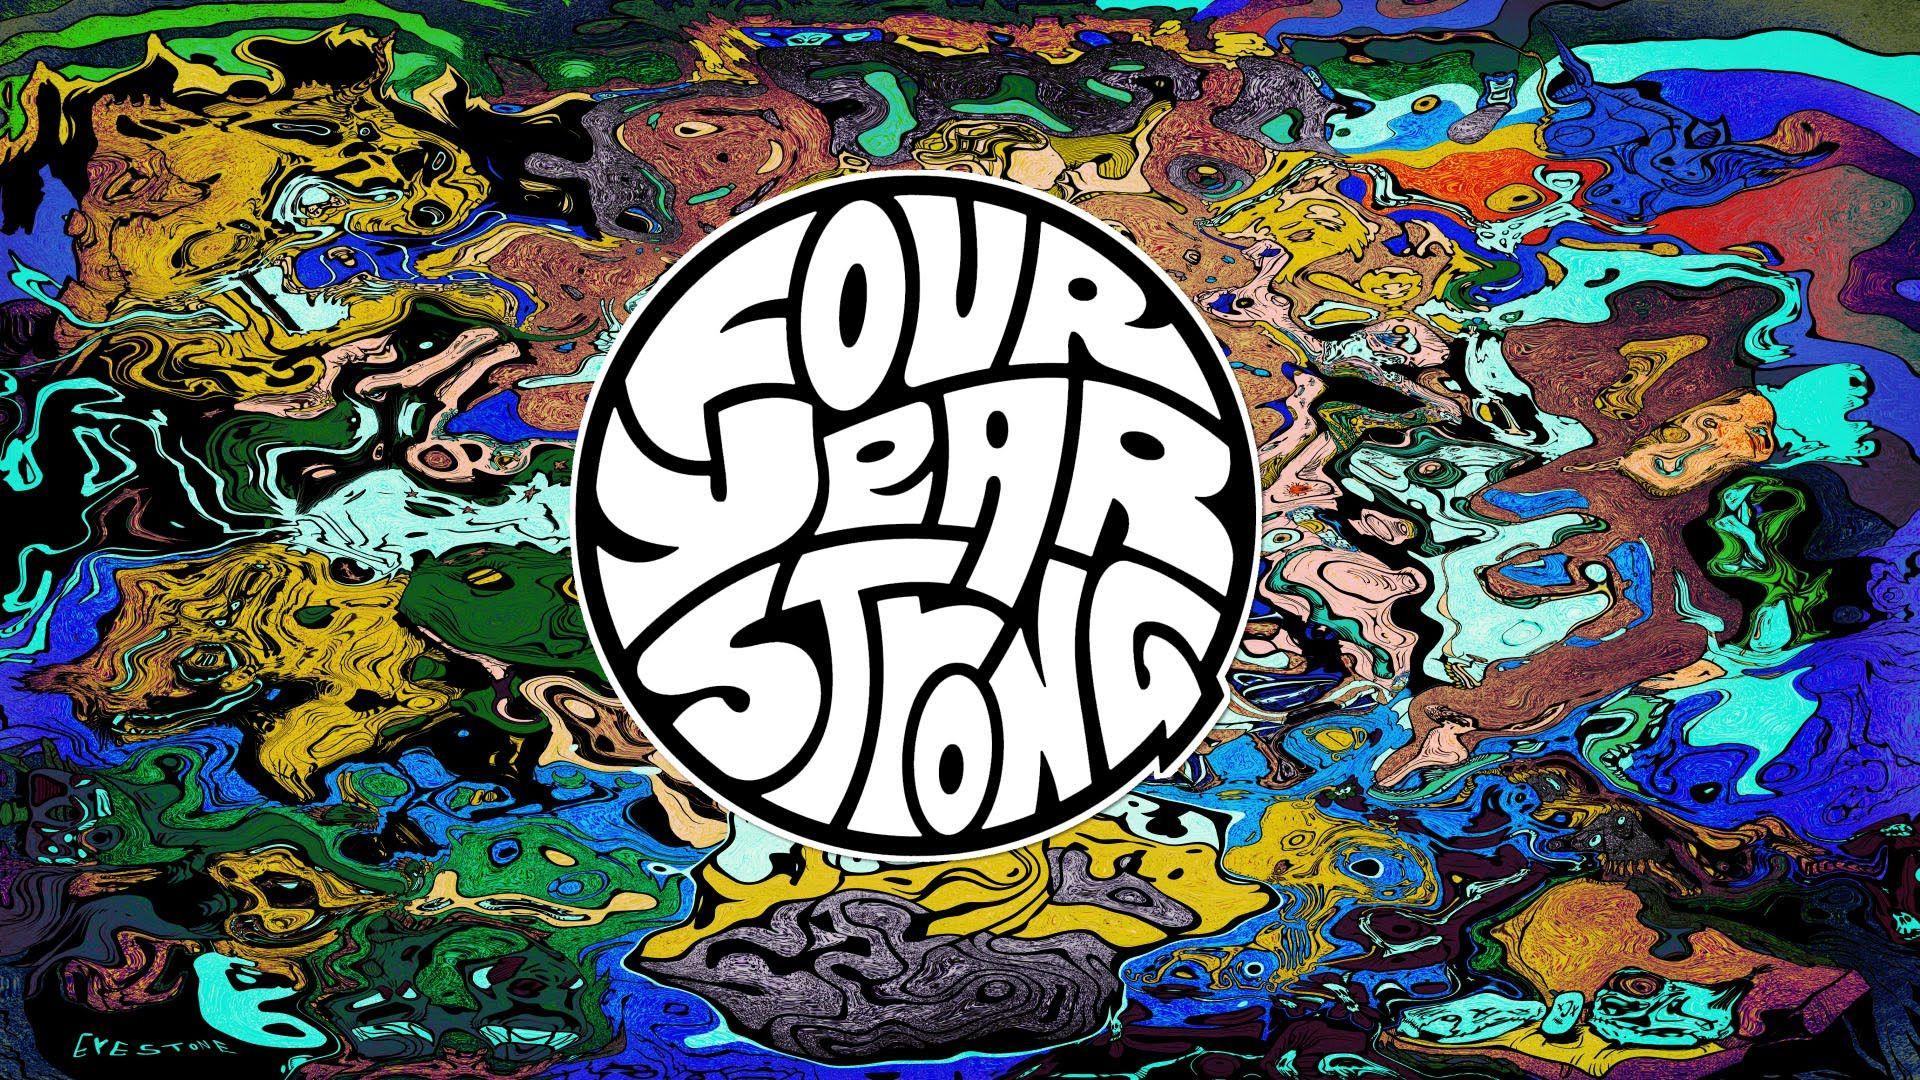 Four Year Strong Wallpaper Group (62)